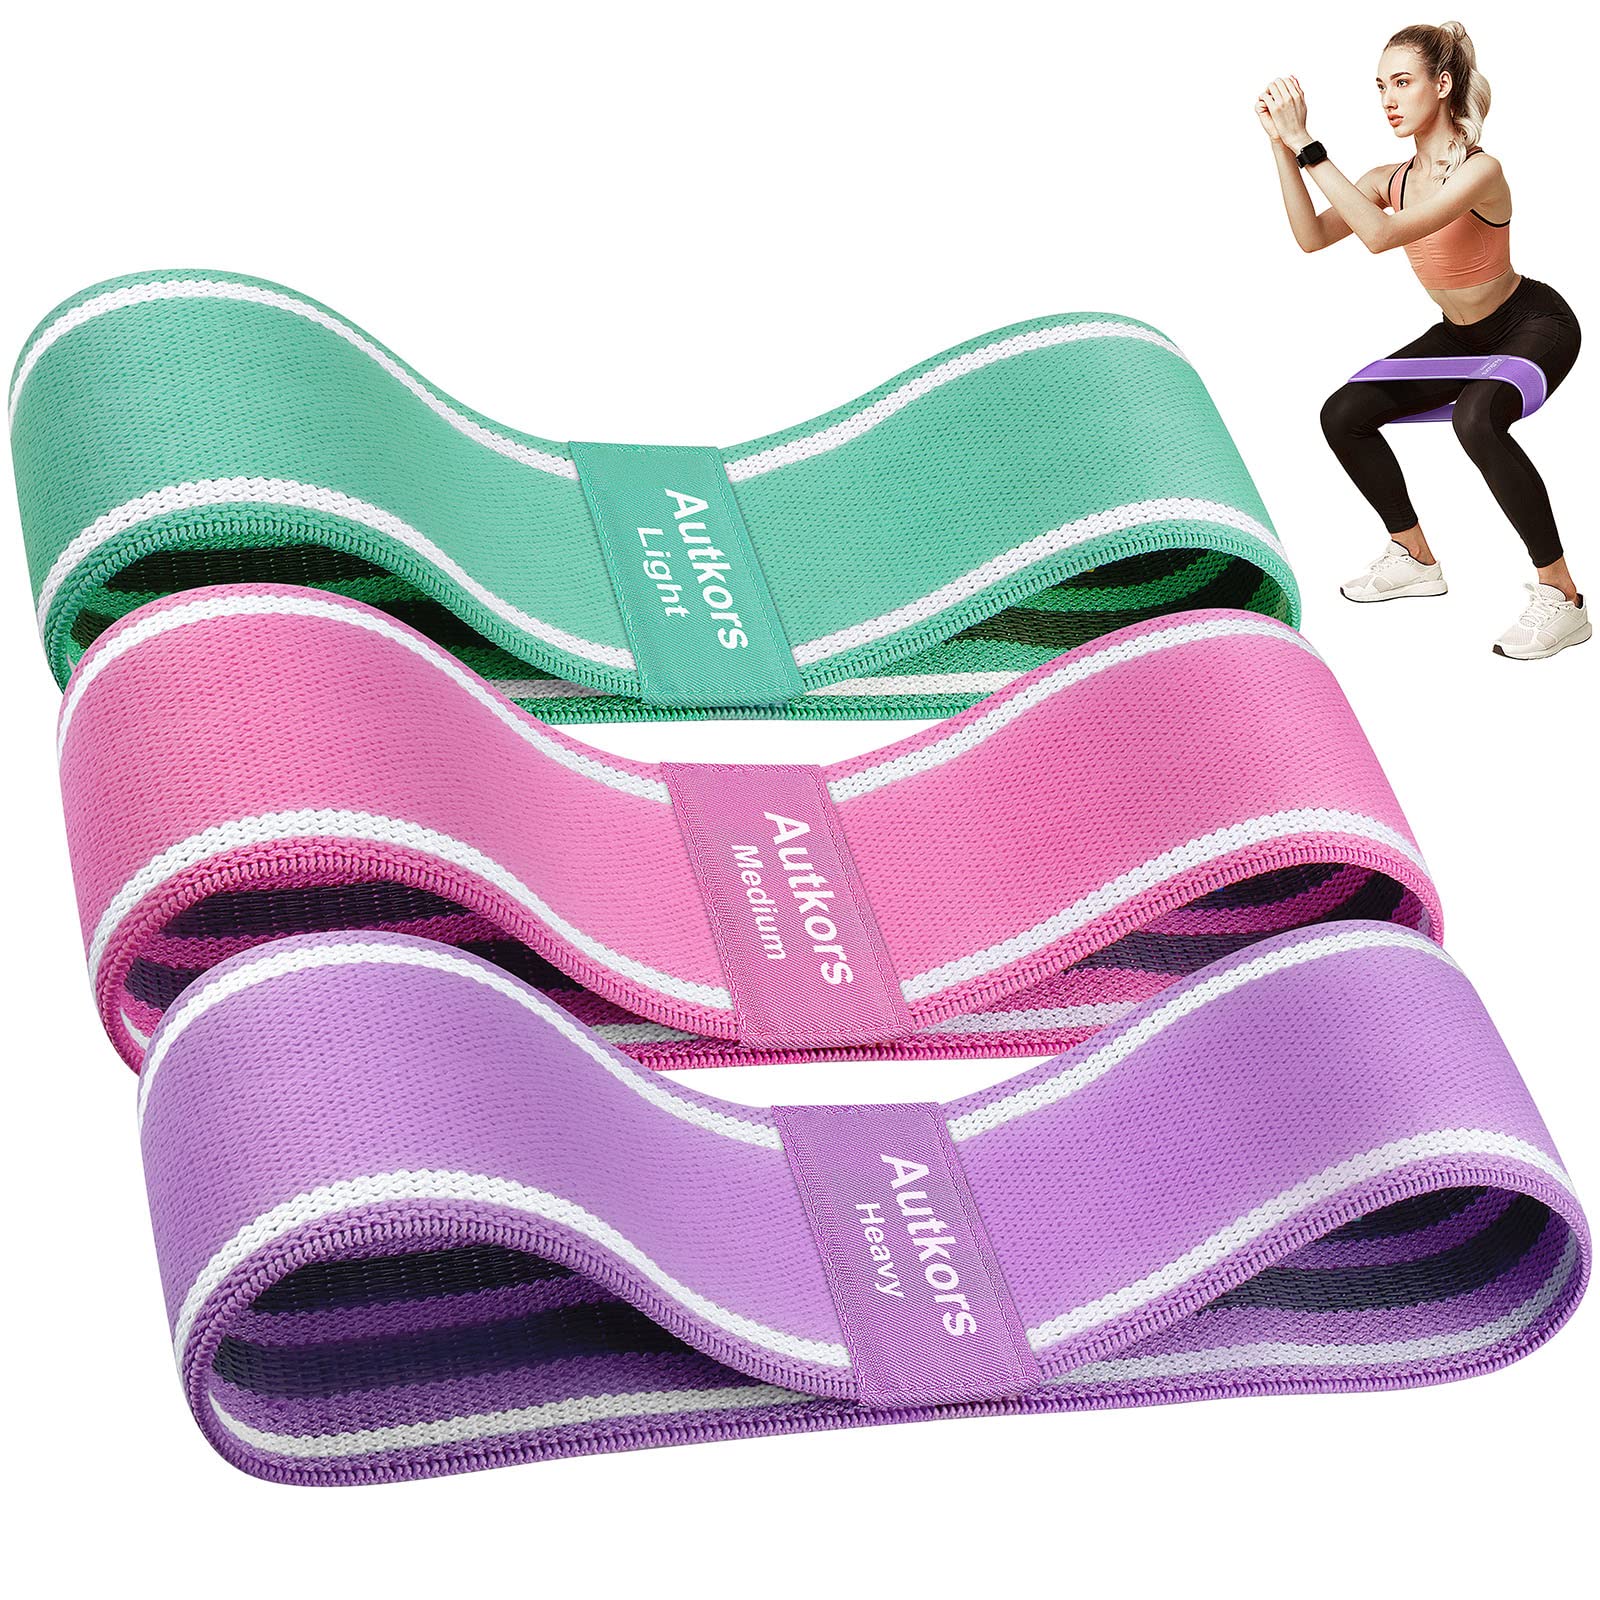 Autkors Resistance Bands, Fabric Exercise Bands Set, Non-Slip Workout Booty Bands for Legs & Butt, 3 Resistance Levels Fitness Bands for Women/Men, Ideal for Yoga/Pilates/Fitness/Squats/Glute Bridge